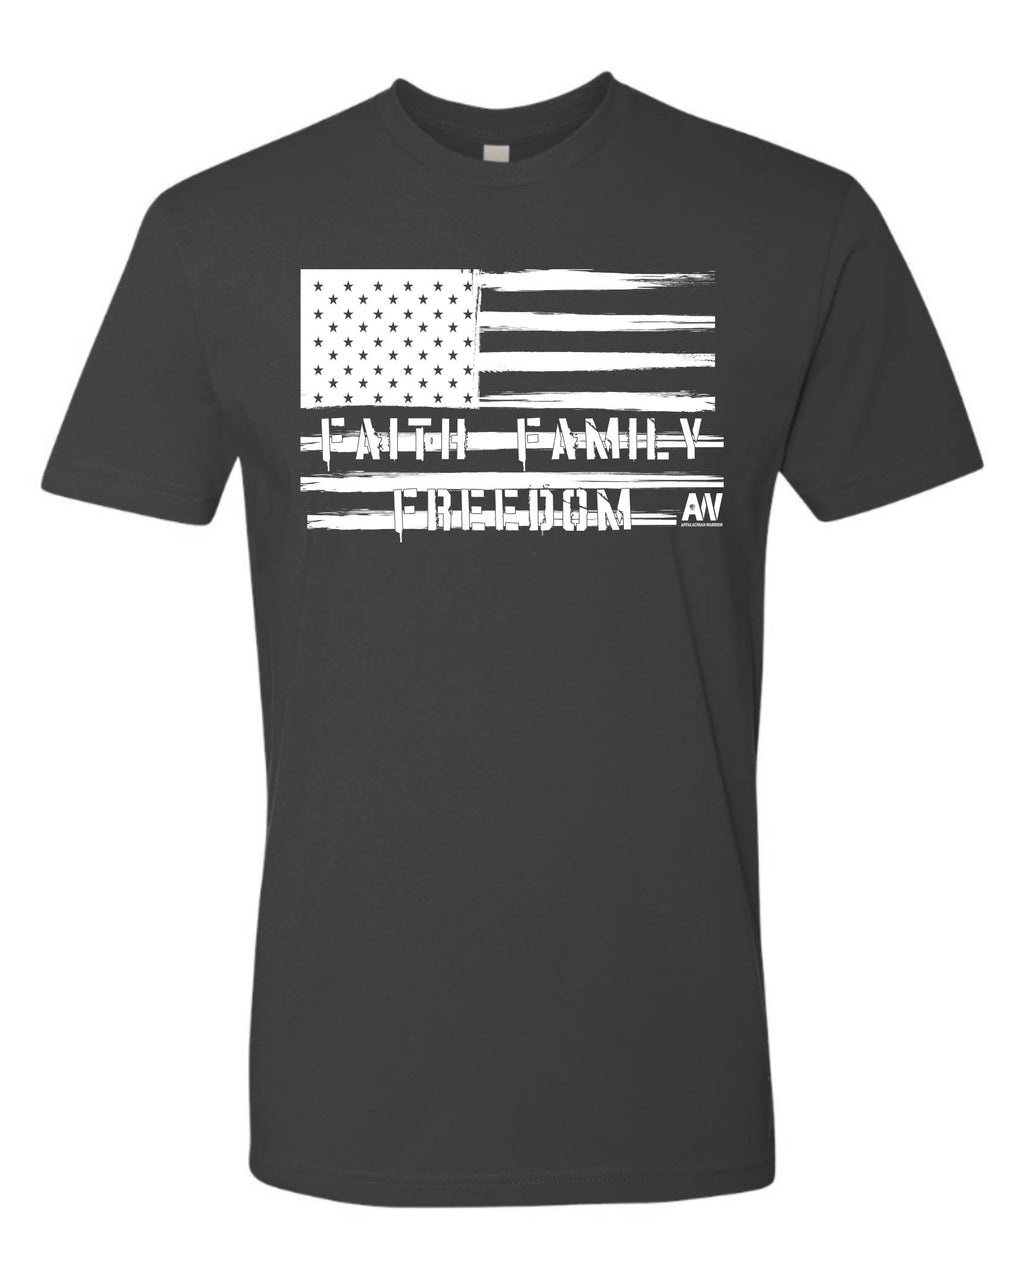 Our Values Flag - Shirts for Men